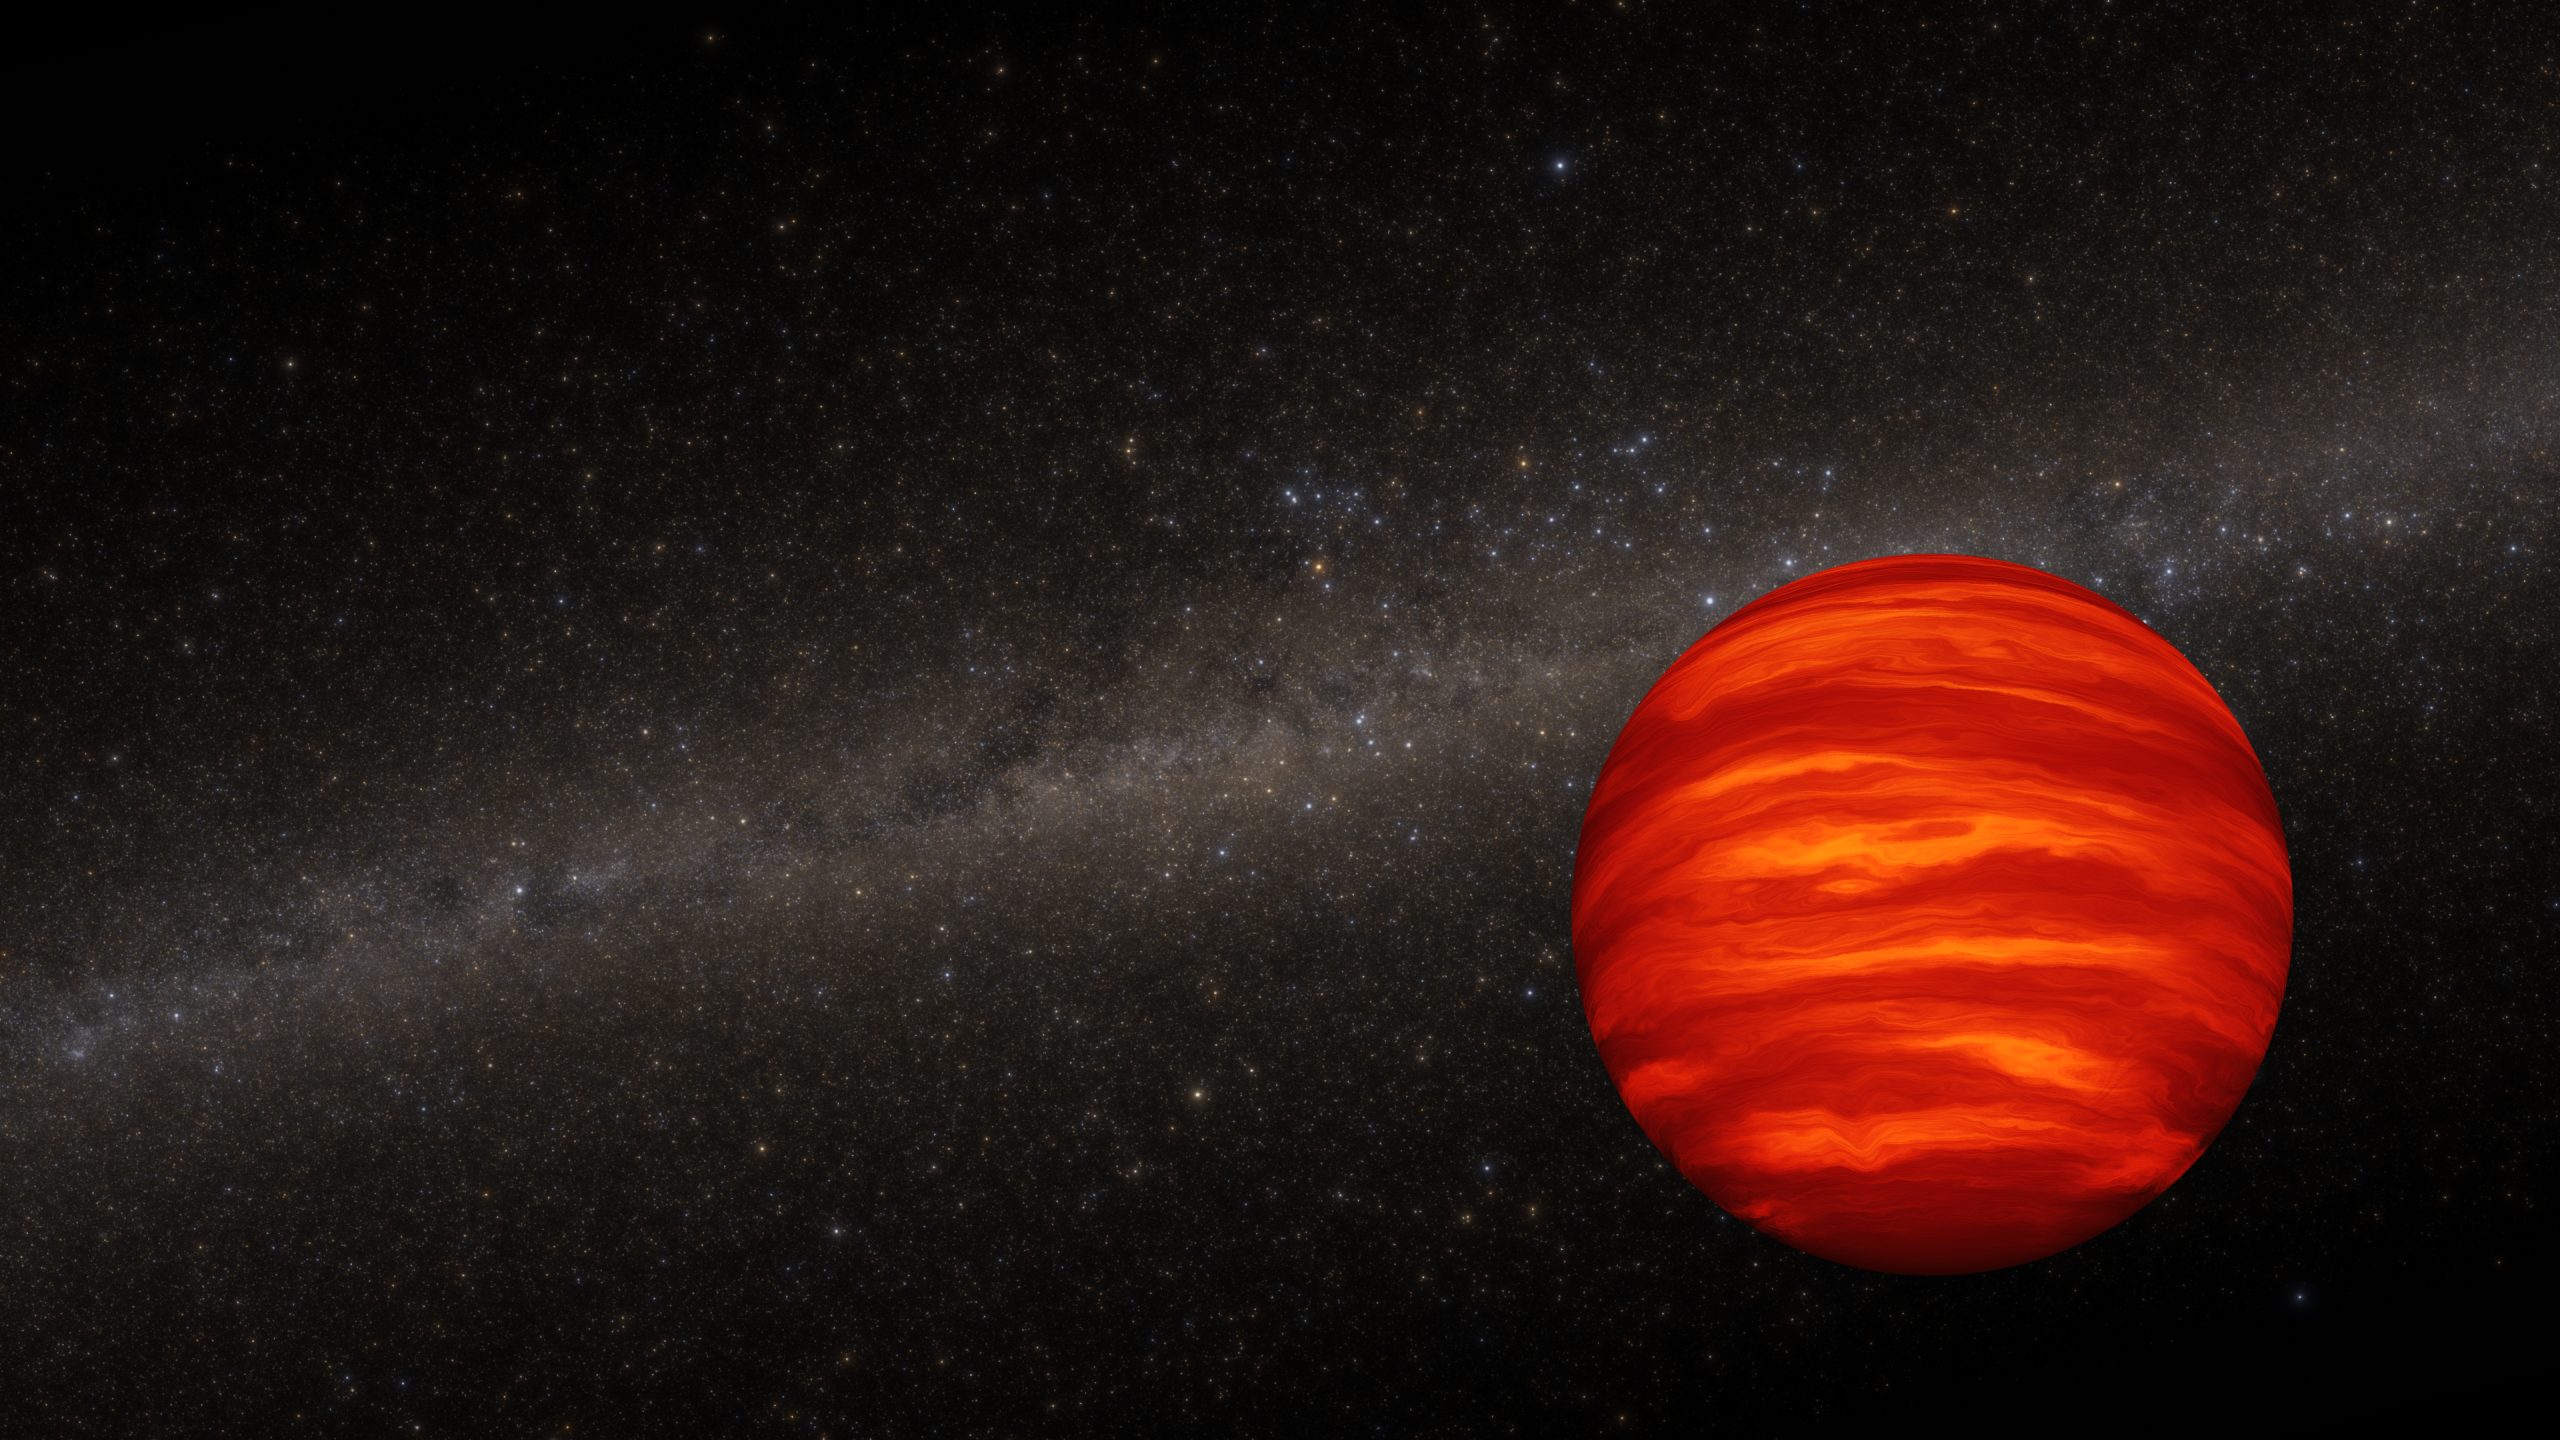 This artist's concept shows a brown dwarf, an object more massive than a planet but smaller than a star. We know that brown dwarfs can have binary companions. But as they age, some of these binary systems gravitationally fall apart, and each brown dwarf goes its separate way, according to a recent study led by UdeM astronomer. Credit: NASA, ESA, Joseph Olmsted (STScI